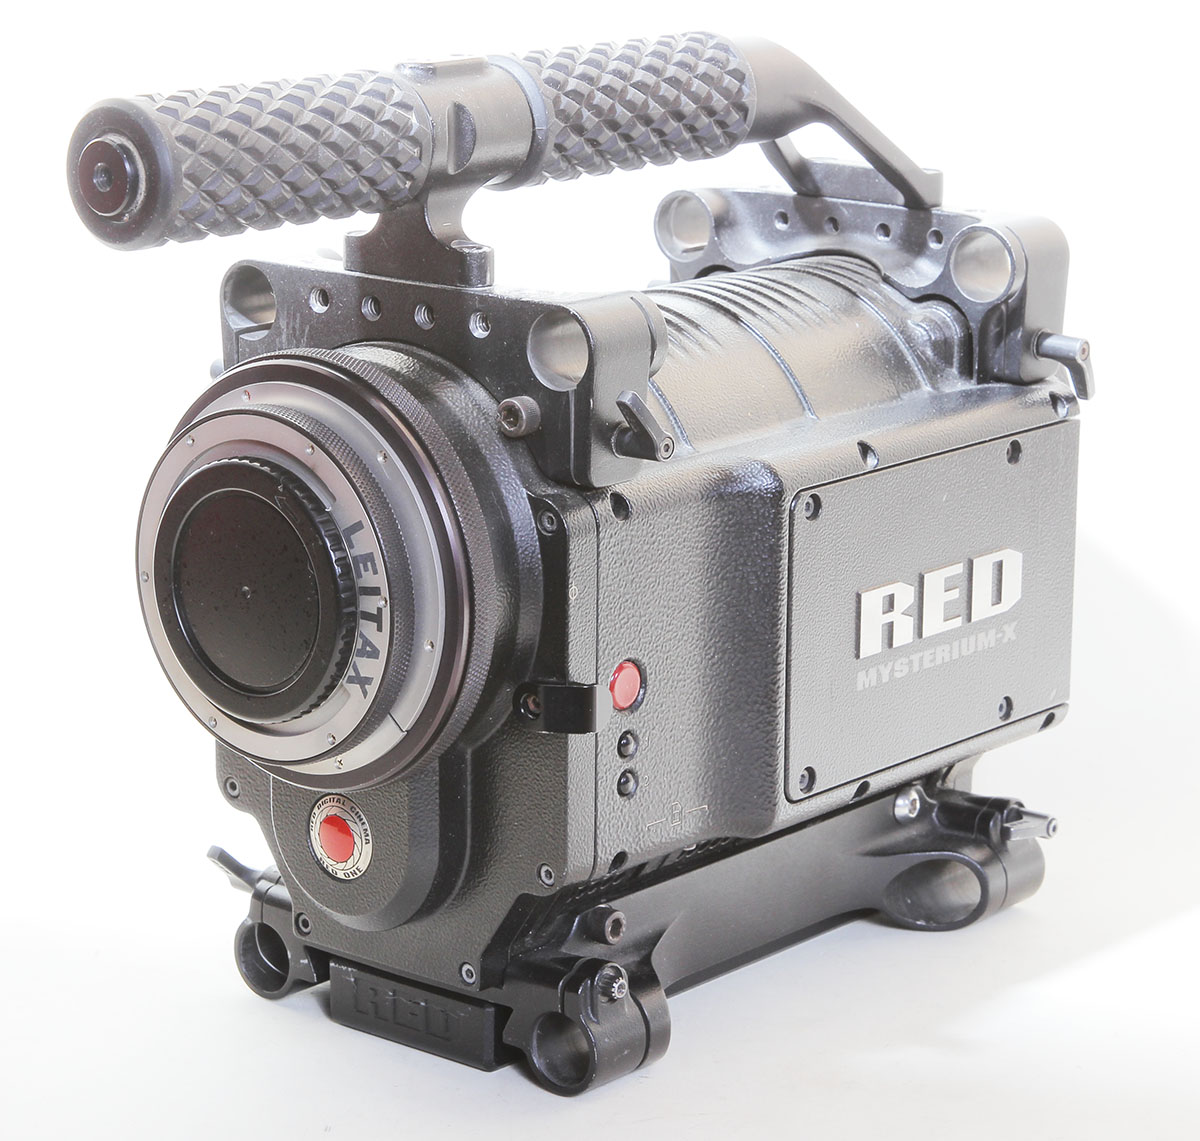 red one camera